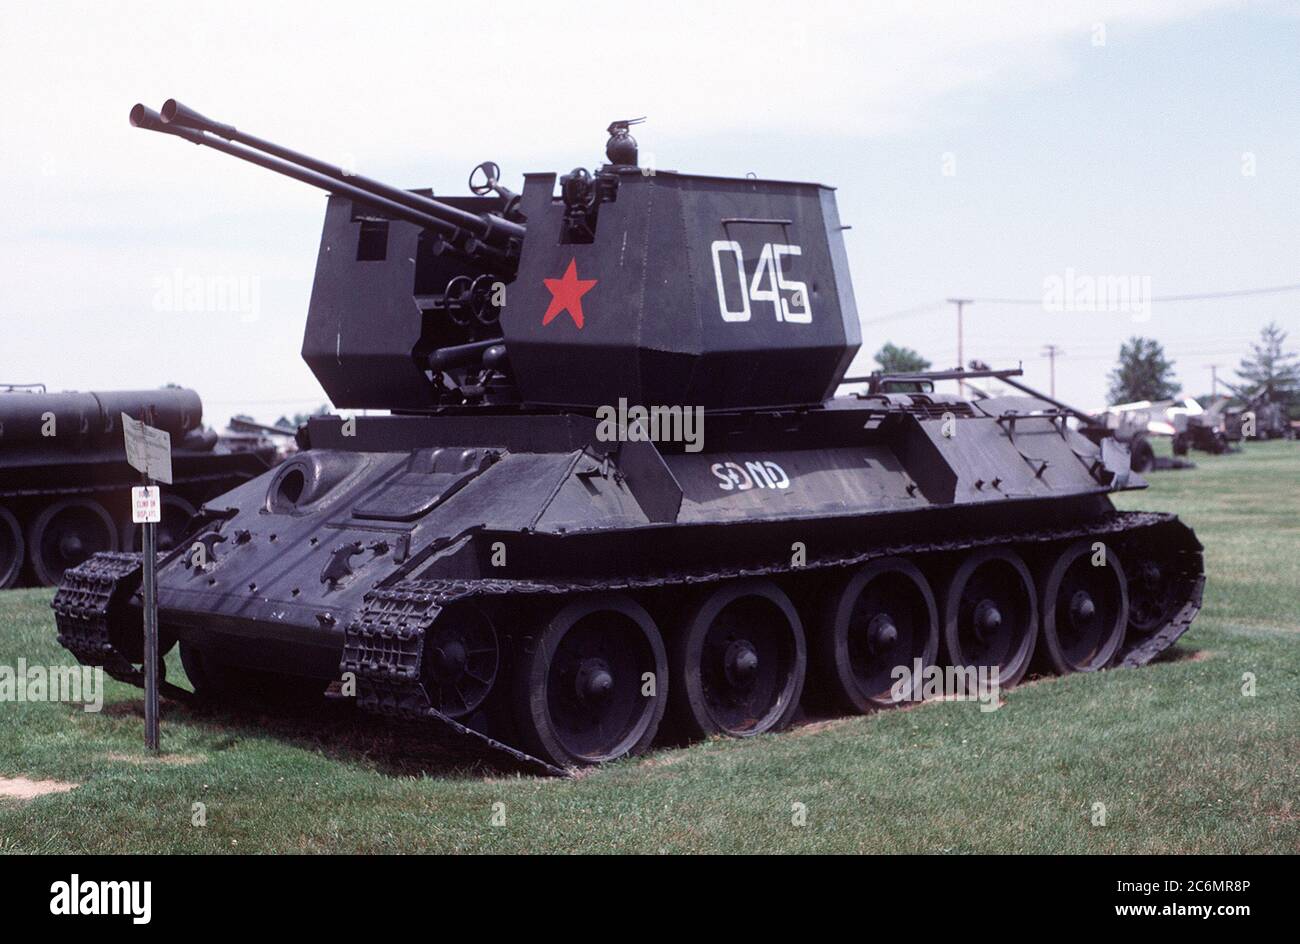 A People's Republic of China Type 65 37mm air defense gun system on display at the U.S. Army Aberdeen Proving Grounds.  It is a Chinese Type 65 anti-aircraft gun mounted on a Soviet T-34 tank body. Stock Photo